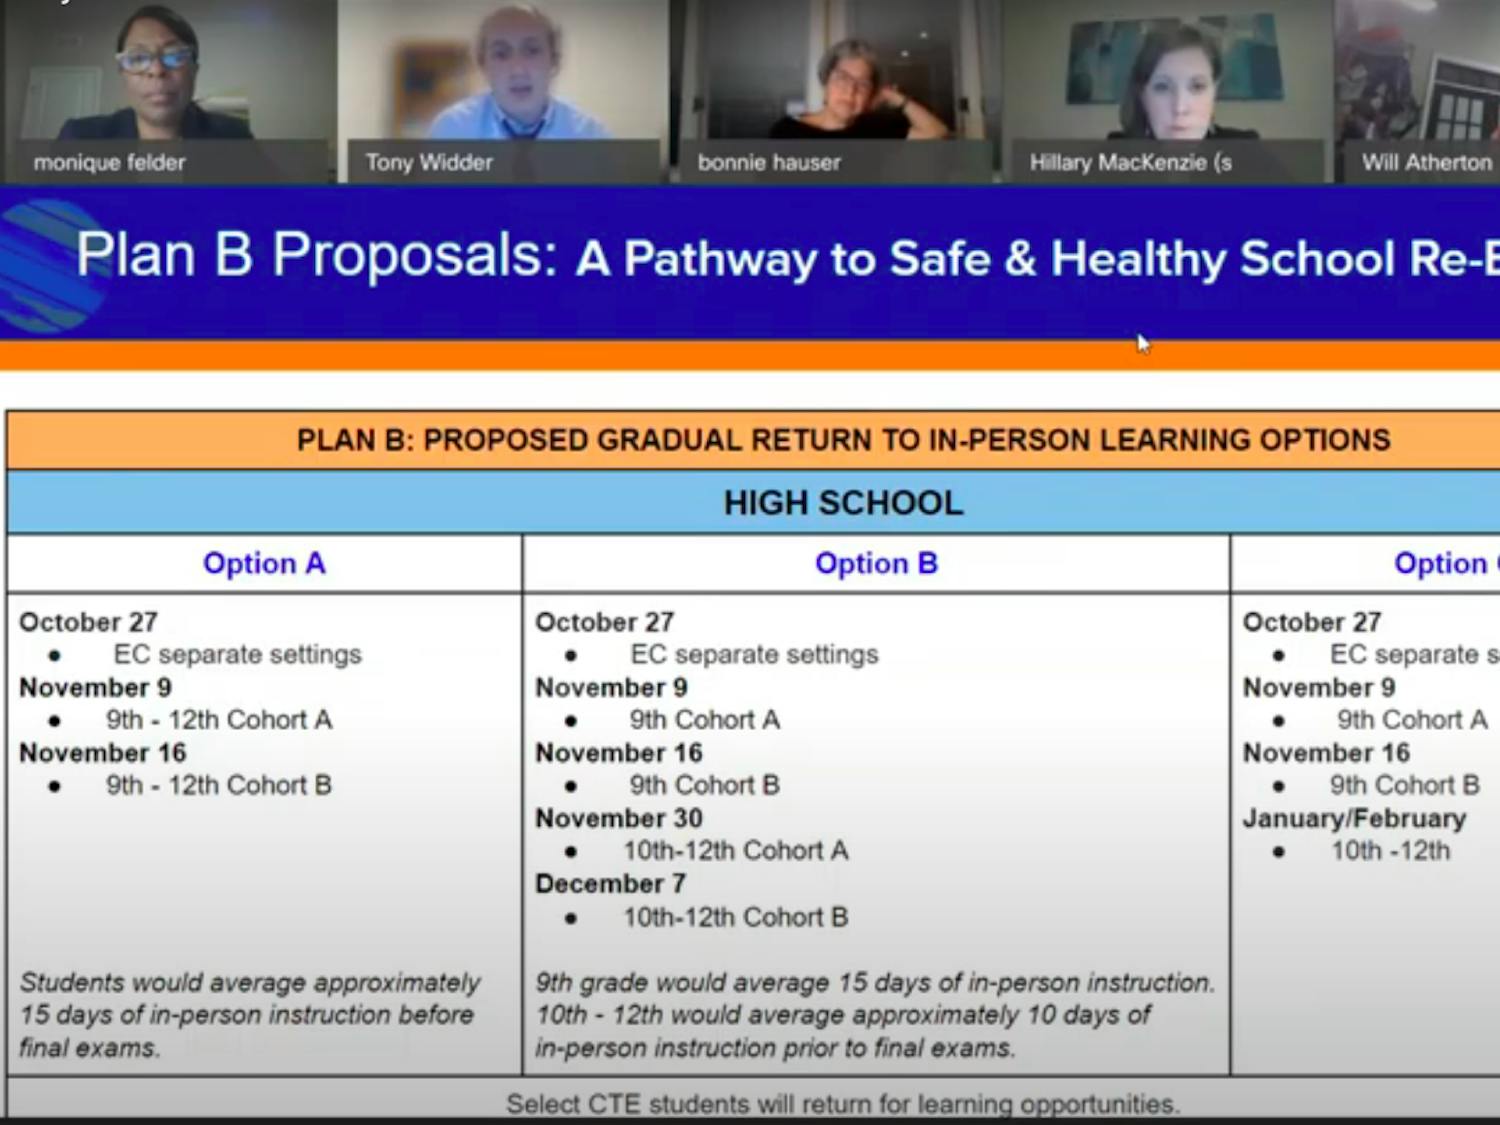 Screenshot from the virtually-held Orange County School Board meeting last weekend where reopening plans for elementary, middle, and high schools were discussed.